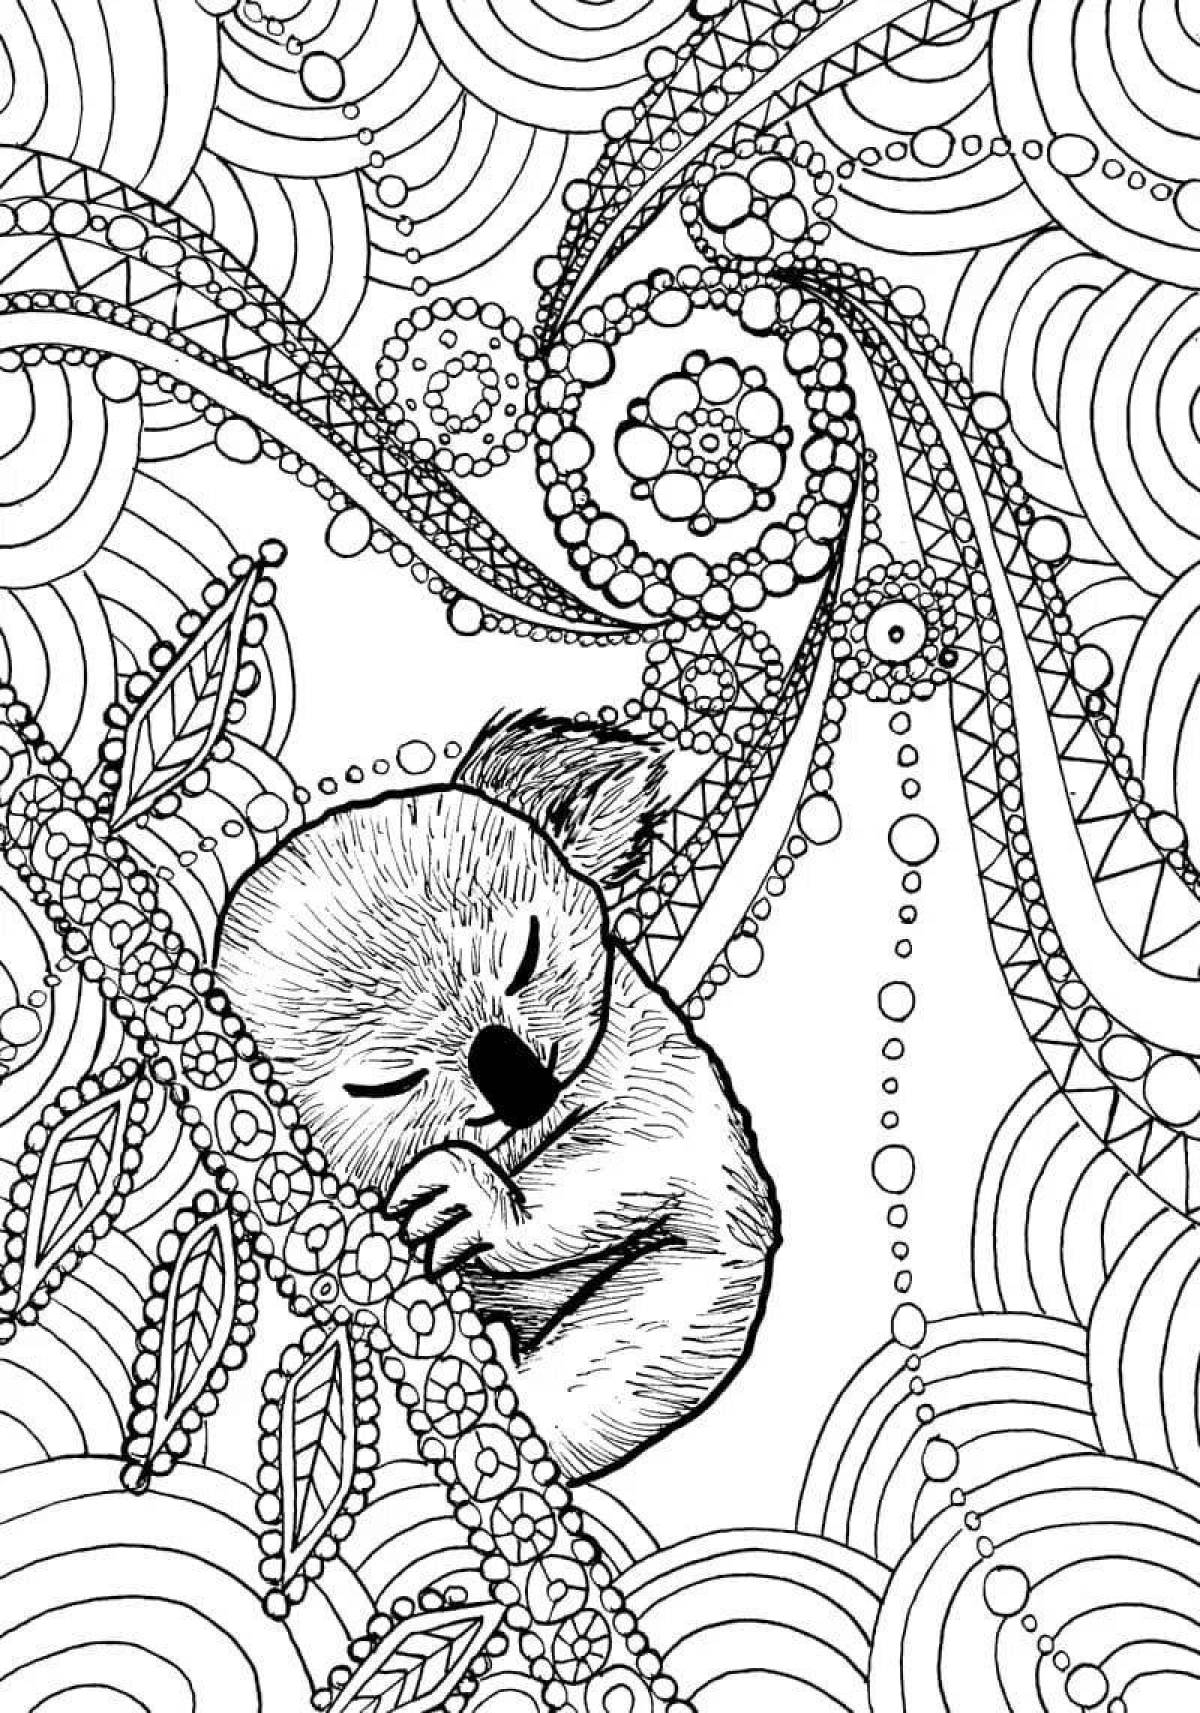 Attractive anti-stress coloring book for adults